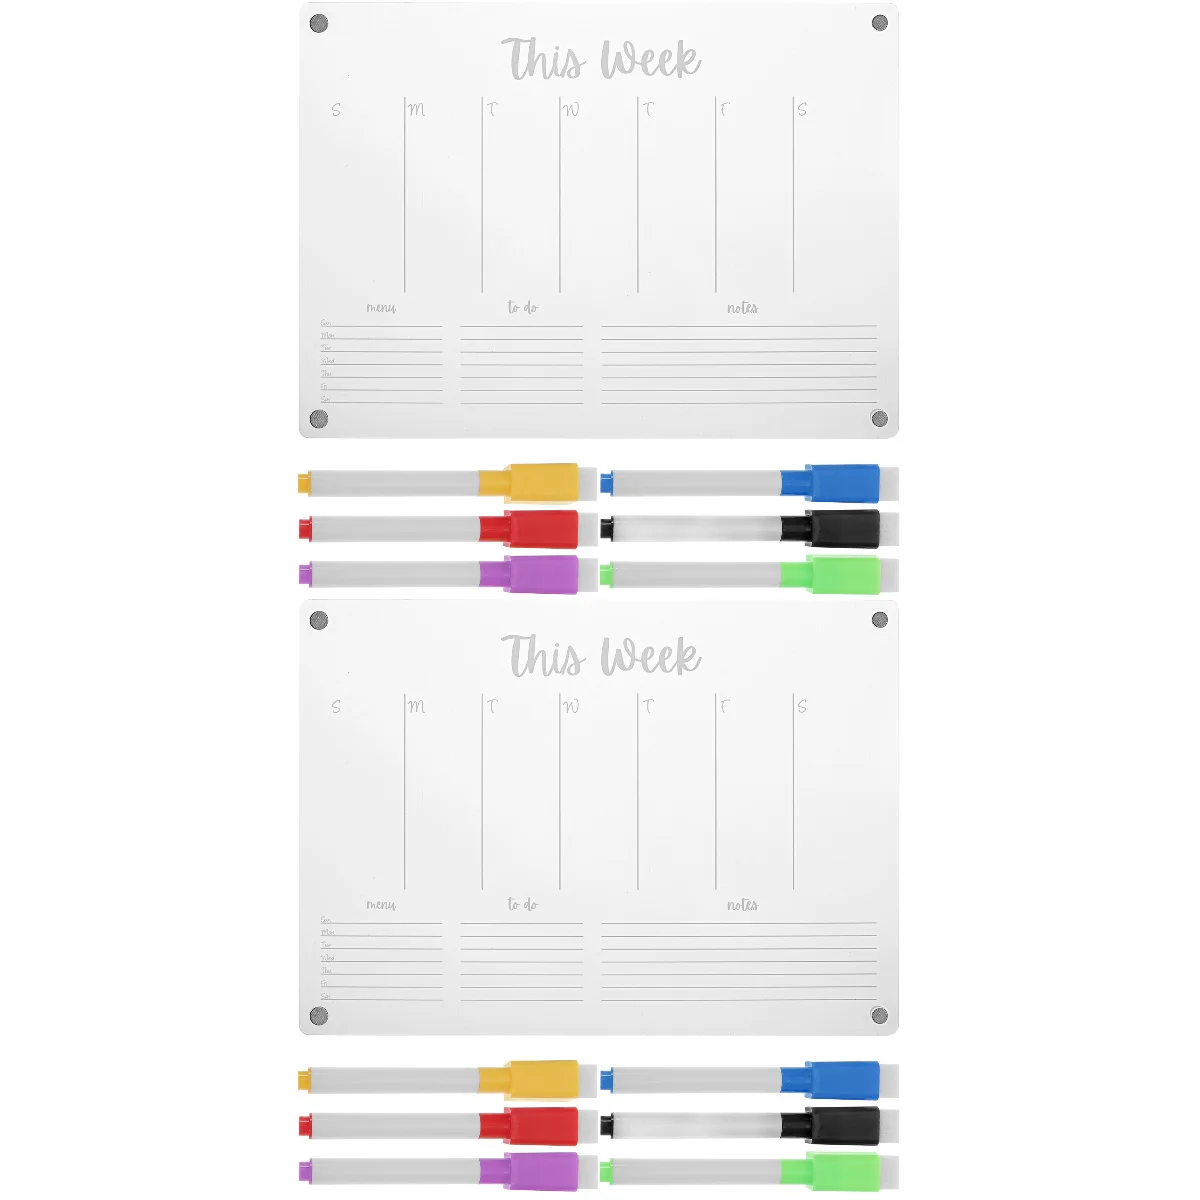 Weekly Calendar for Fridge Acrylic Message Board Refrigerator Magnetic Dry Erase a3 size magnetic refrigerator monthly weekly planner calendar table dry erase whiteboard schedules fridge sticker message board